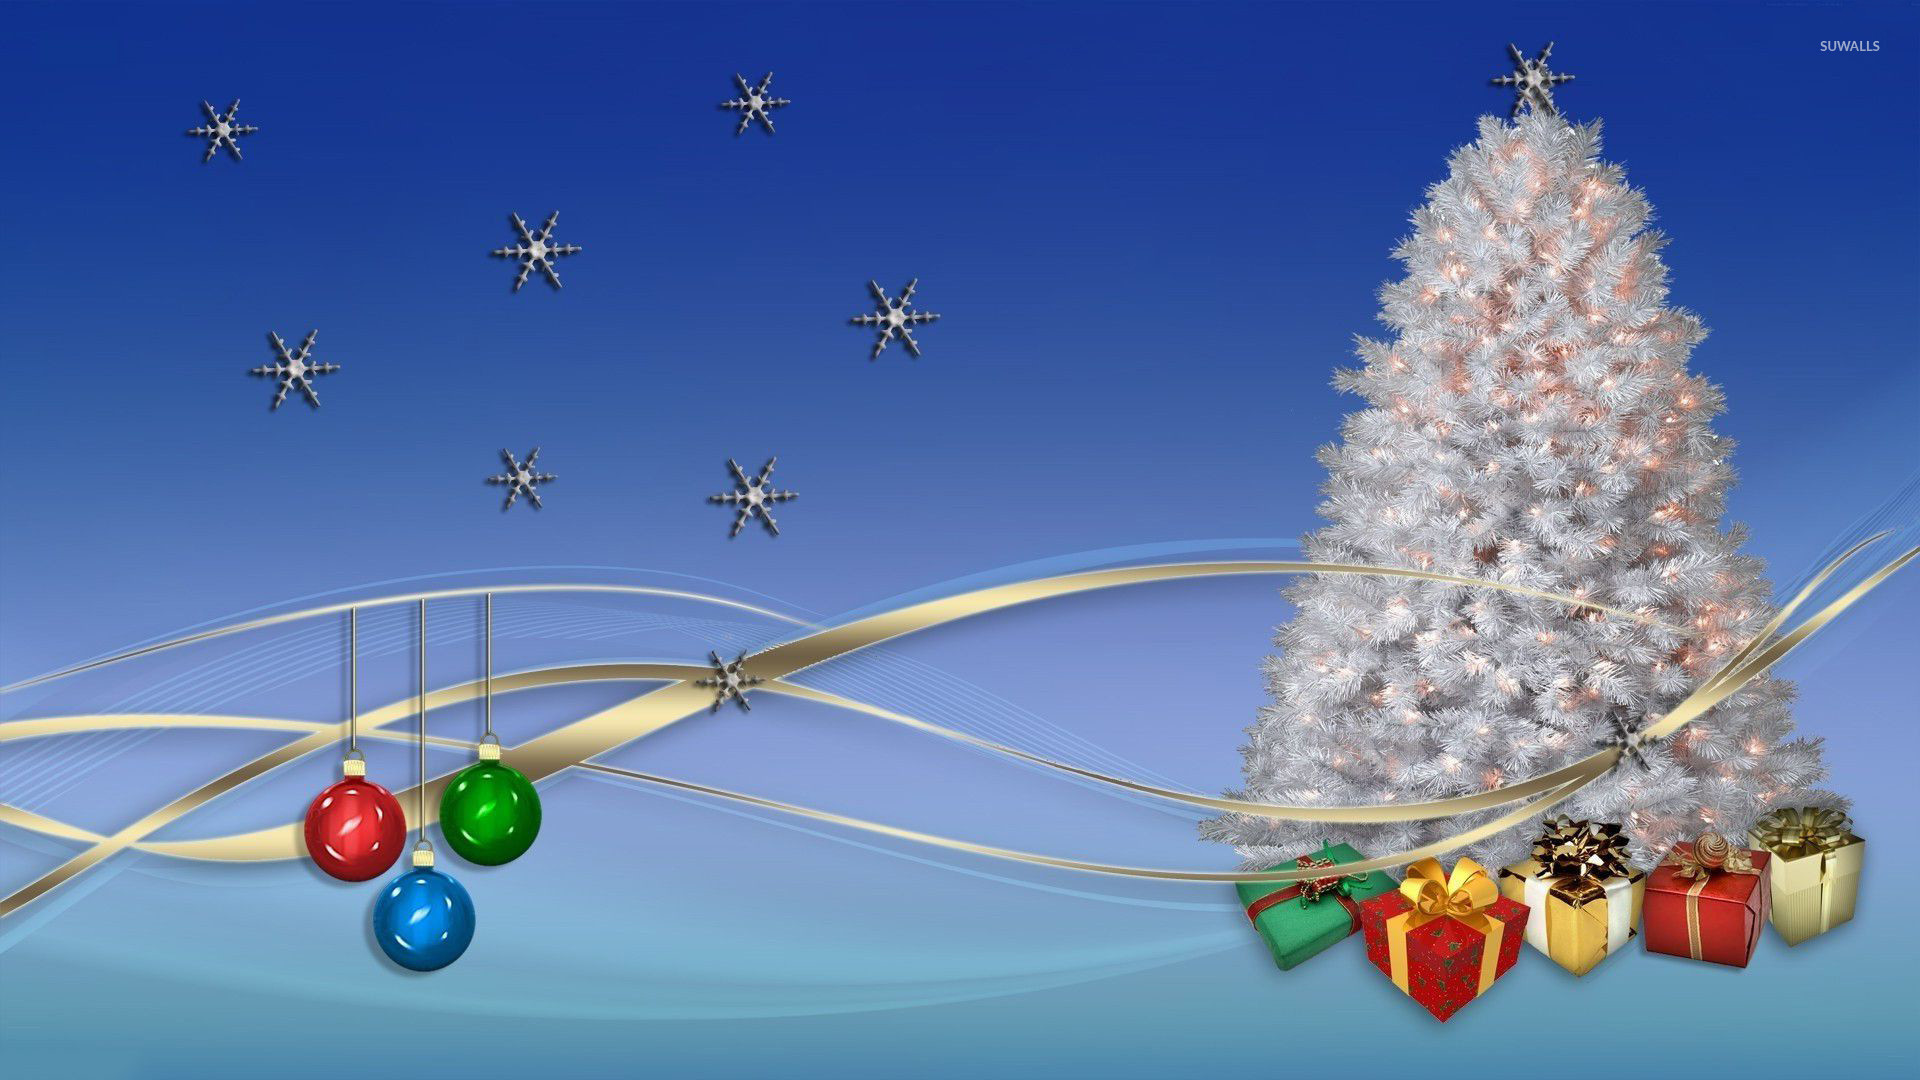 1920x1080 Lights in a white Christmas tree with a snowflake on top wallpaper